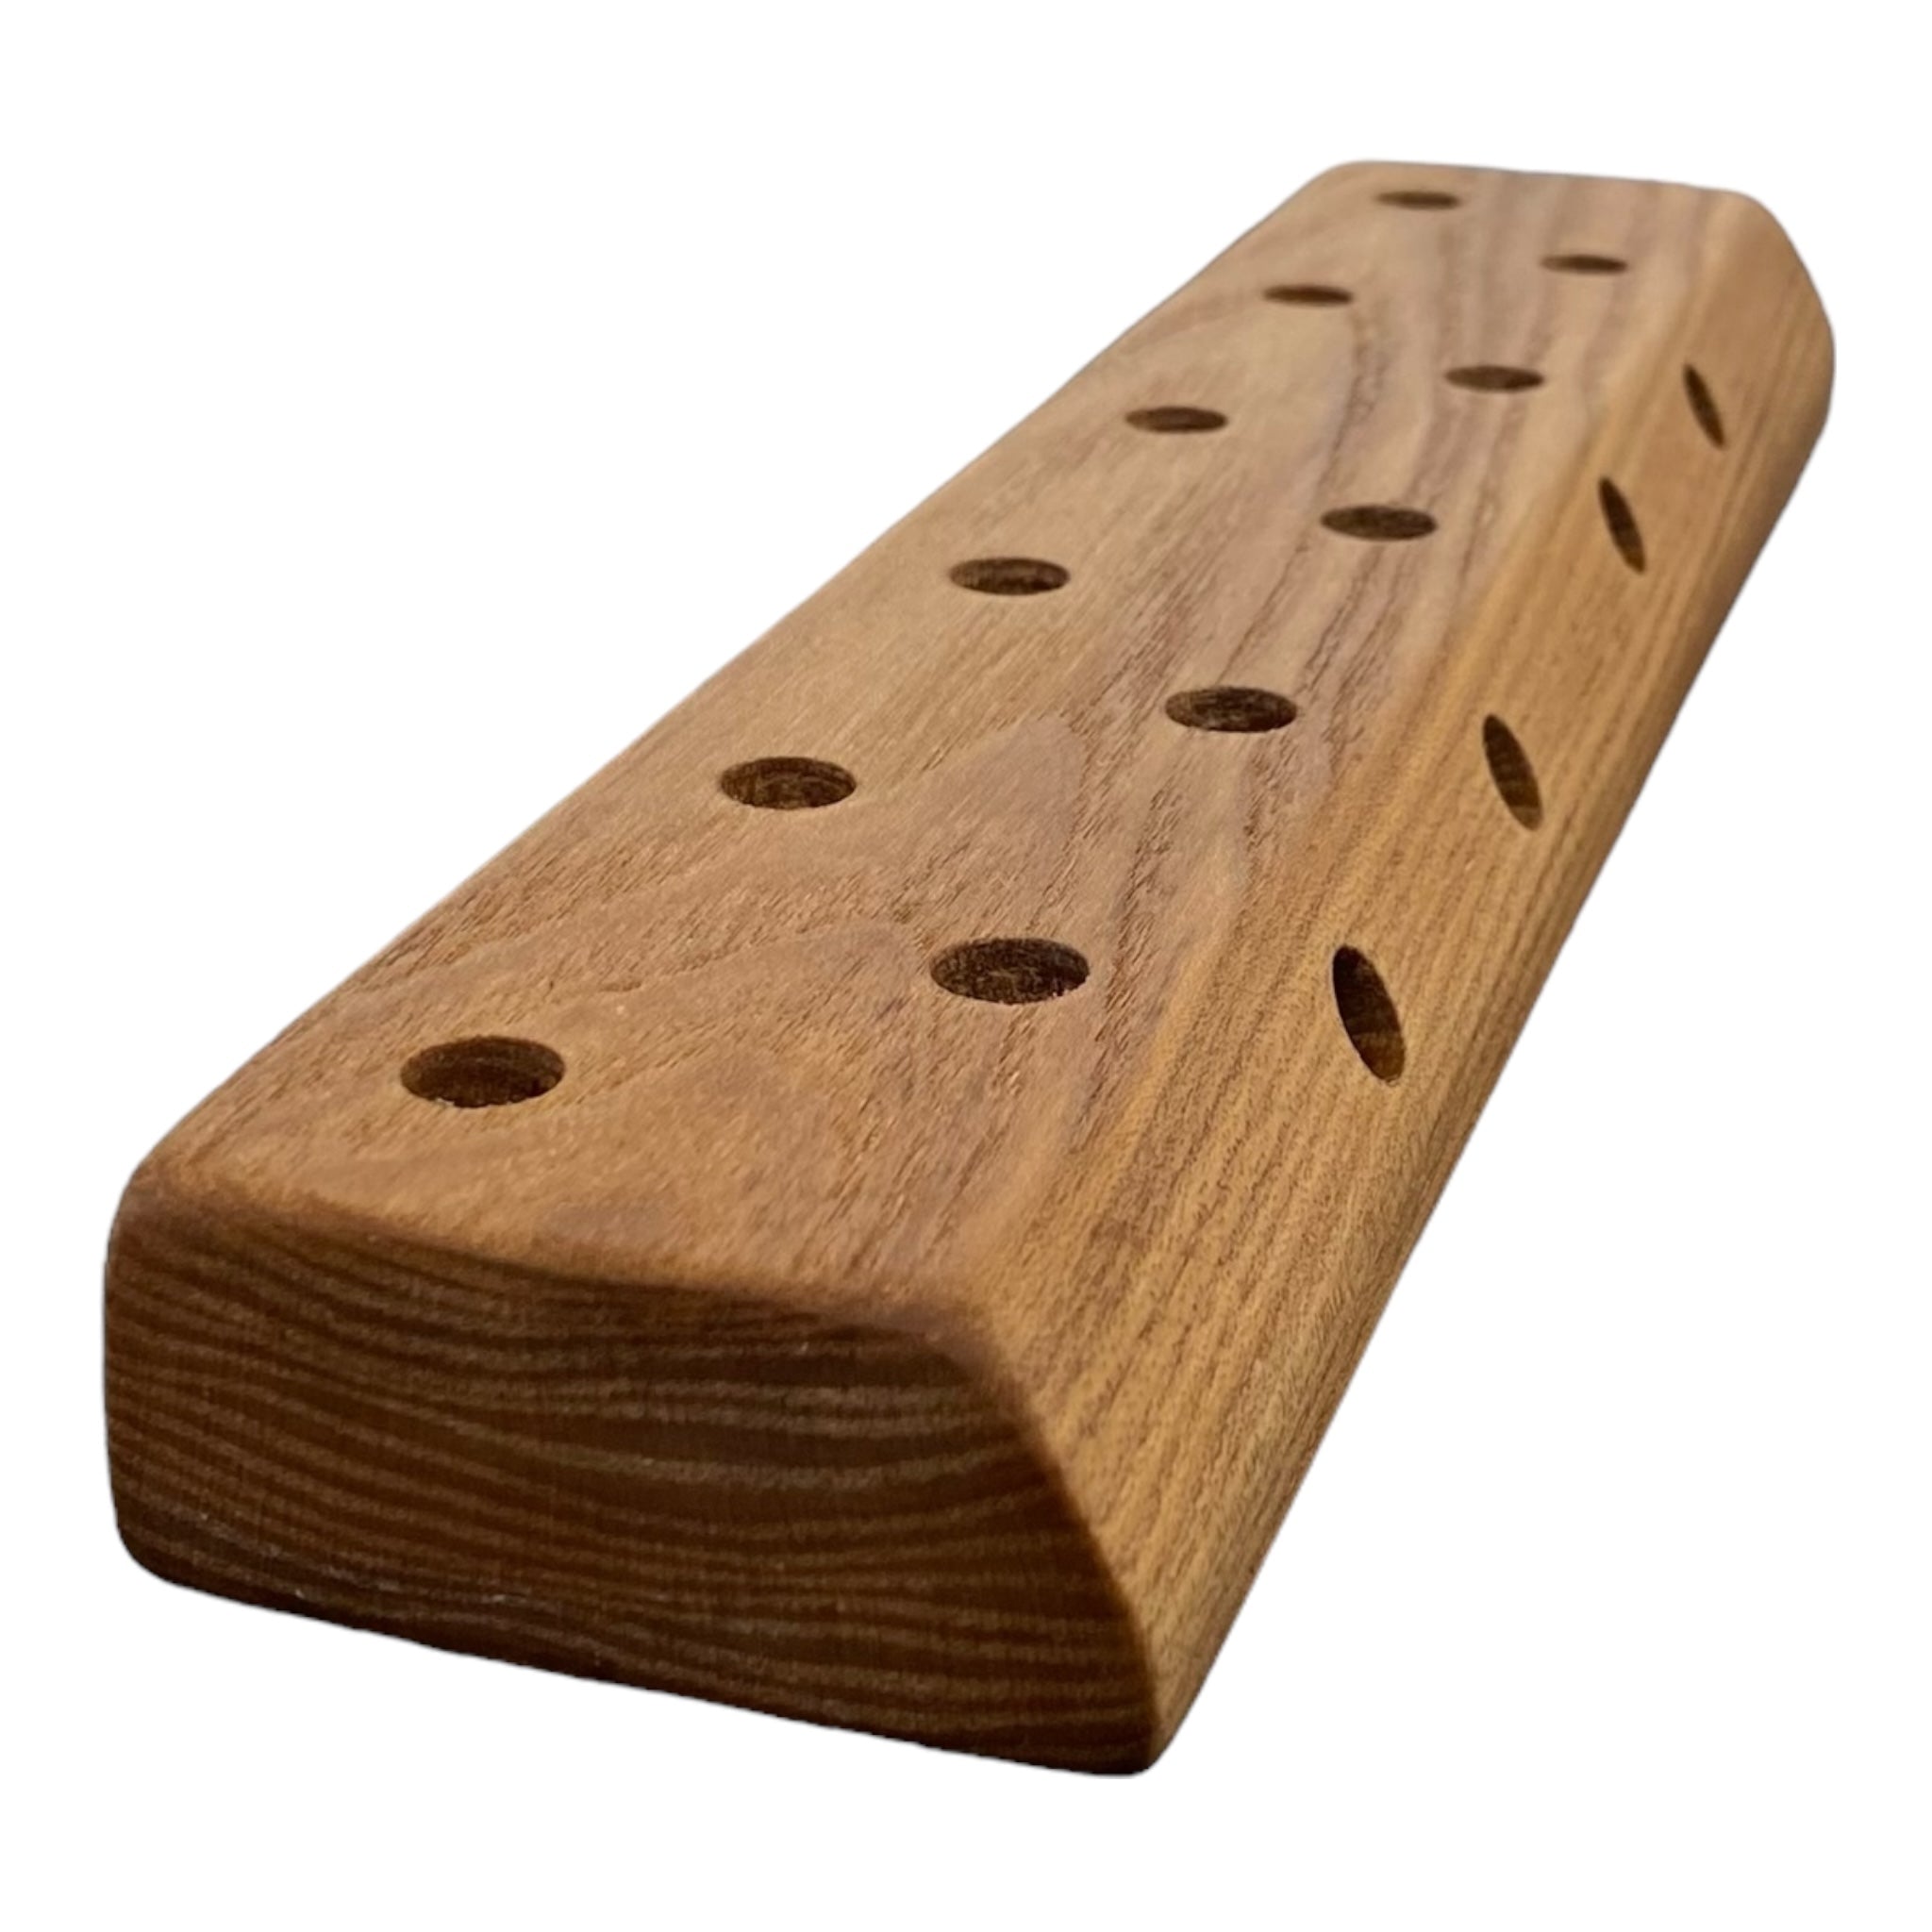 15 Hole Wood Display Stand Holder For 10mm Bong Bowl Pieces Or Quartz Bangers made from oak for sale